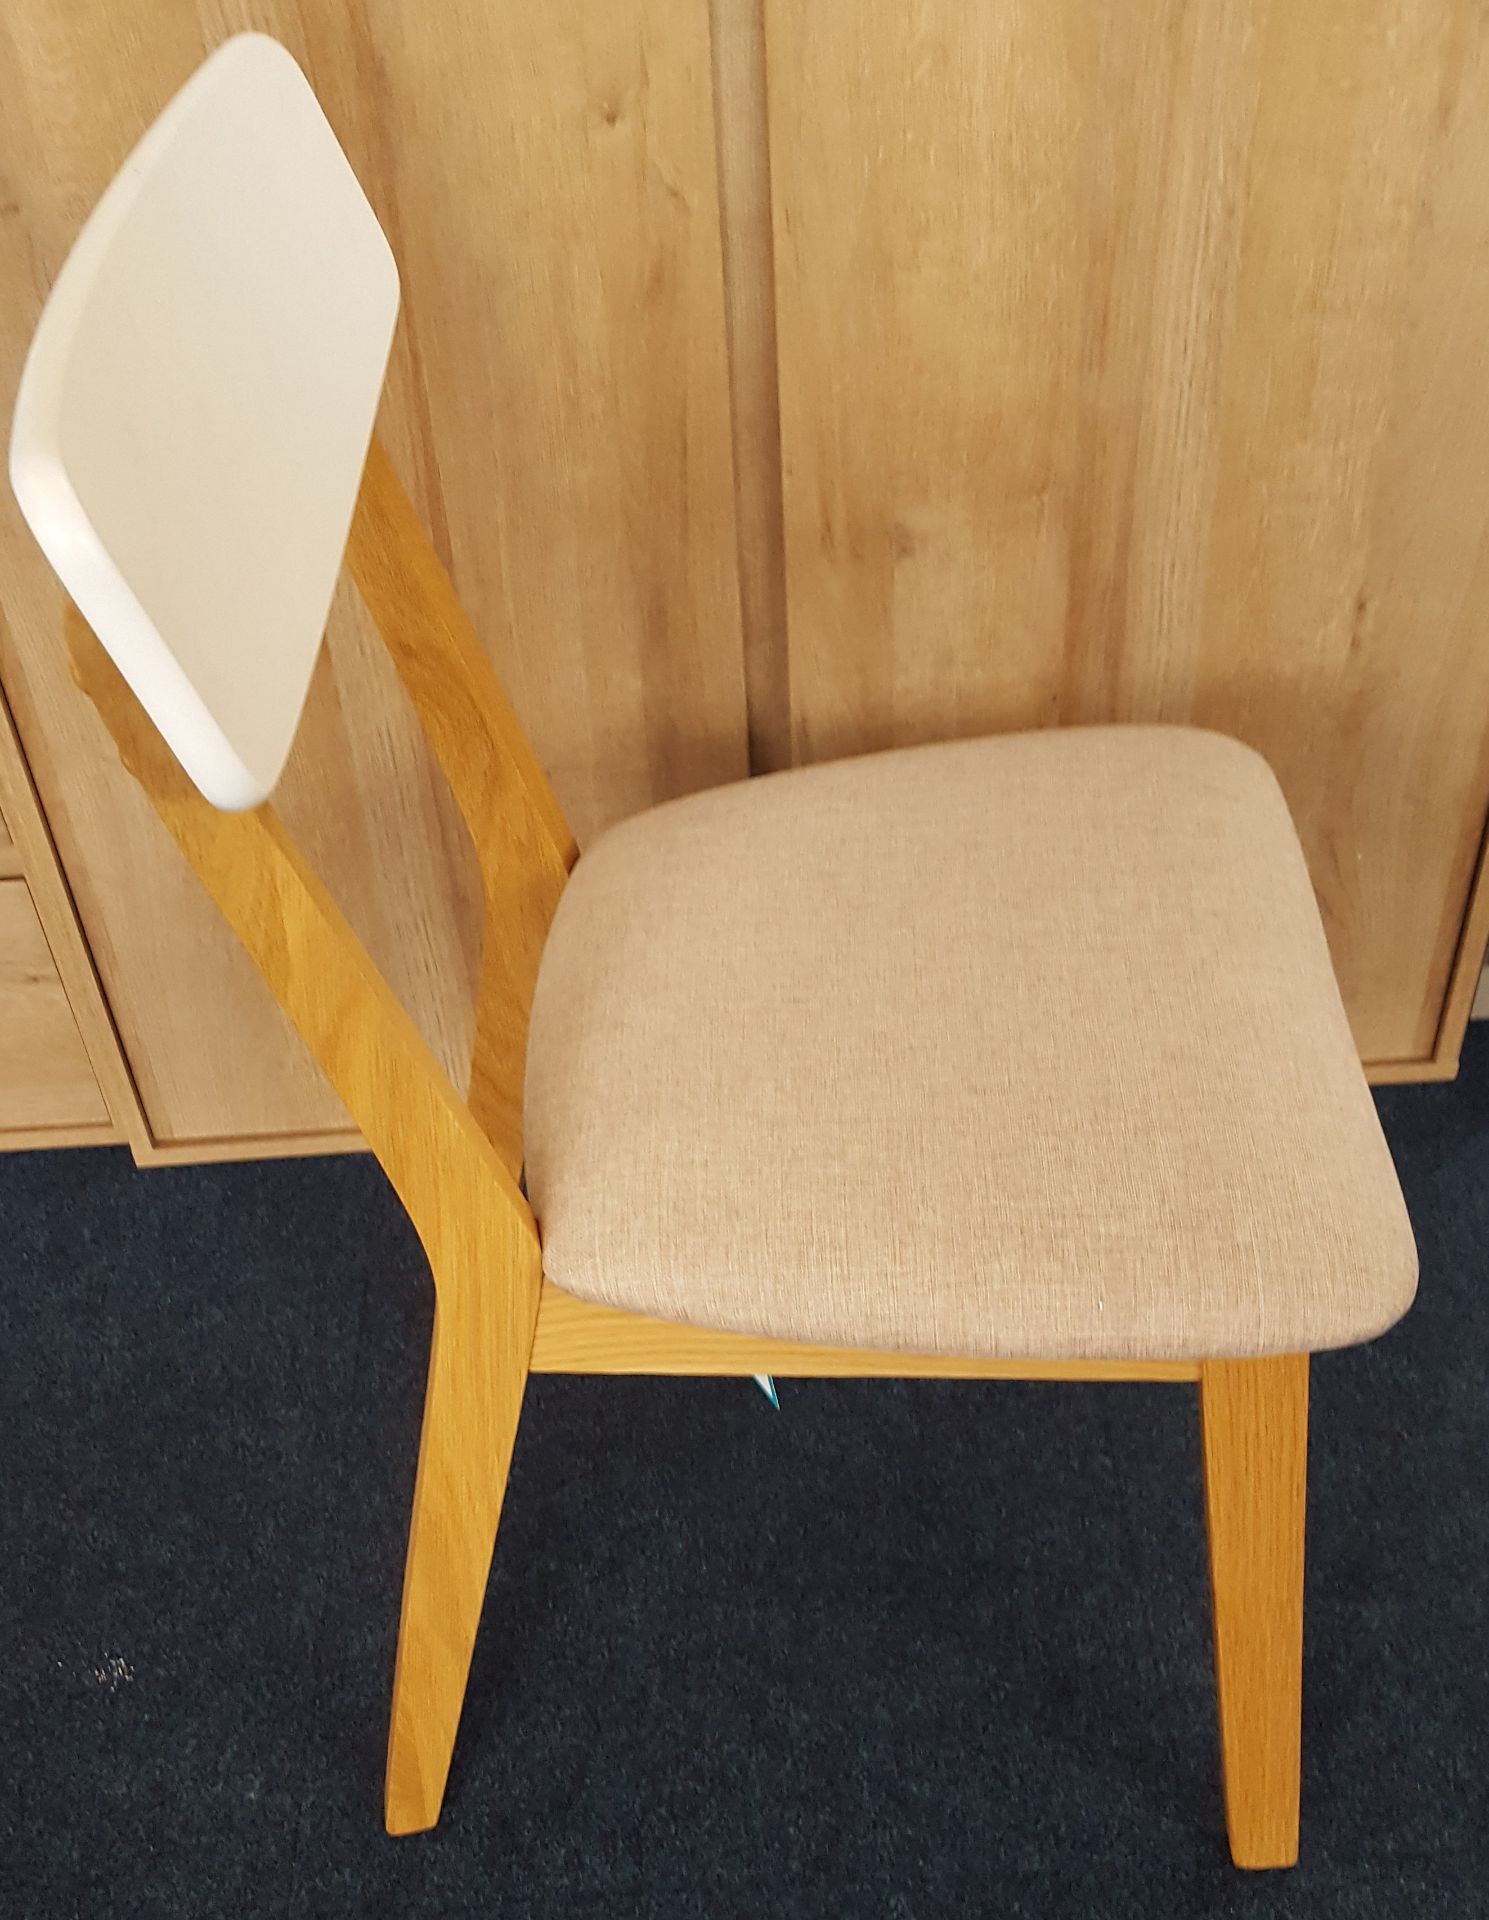 4 white&beige chairs - Image 2 of 2